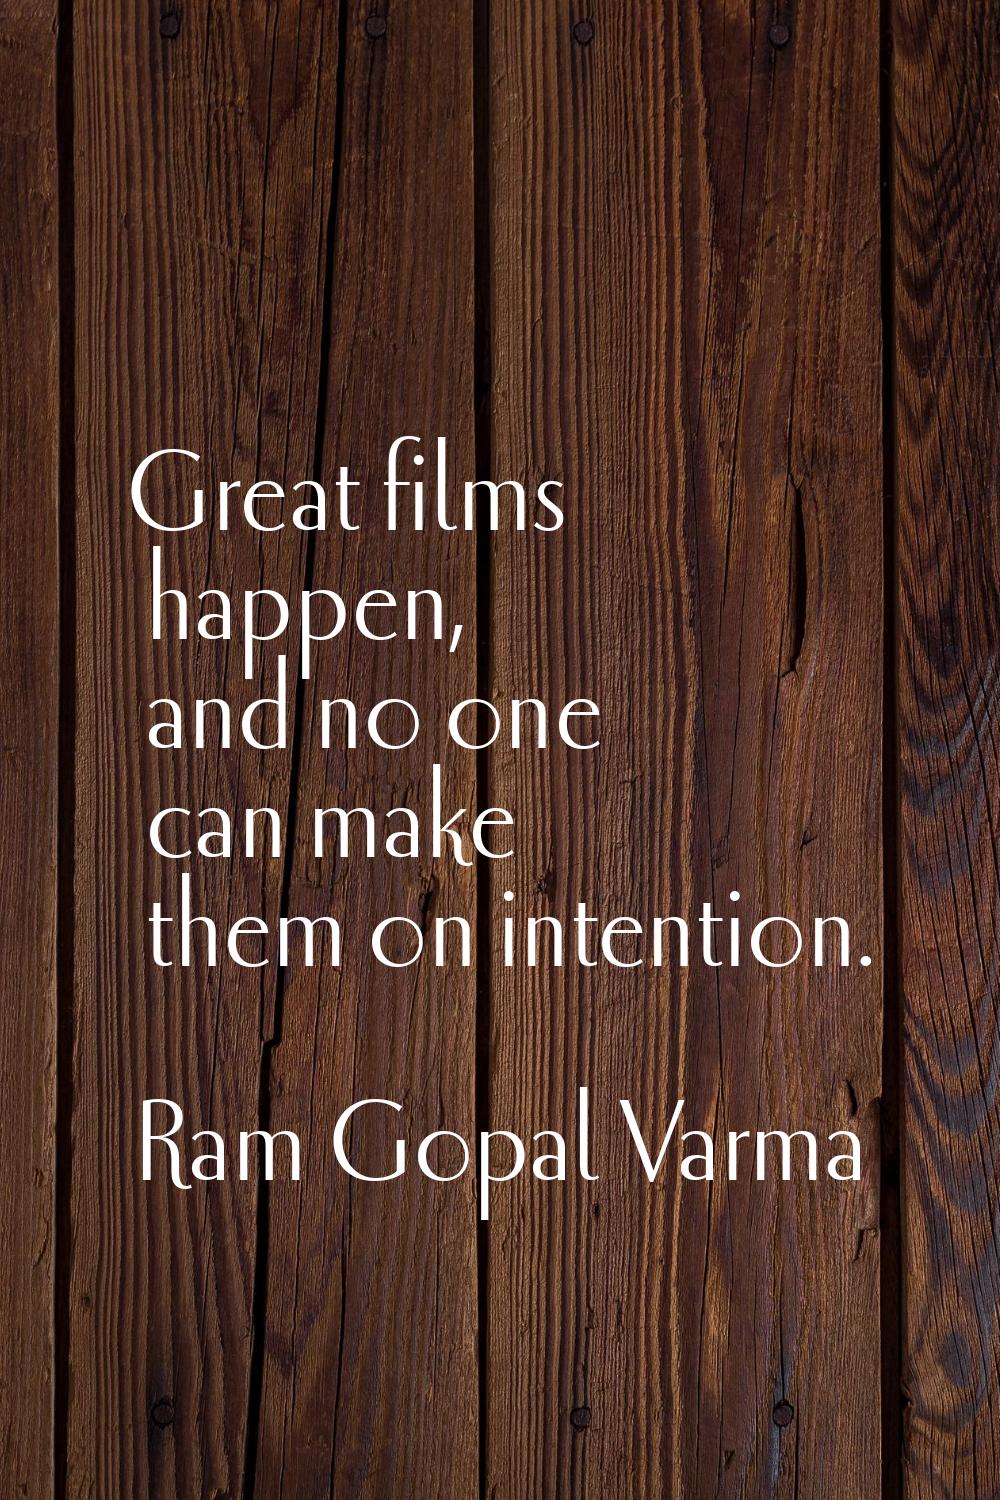 Great films happen, and no one can make them on intention.